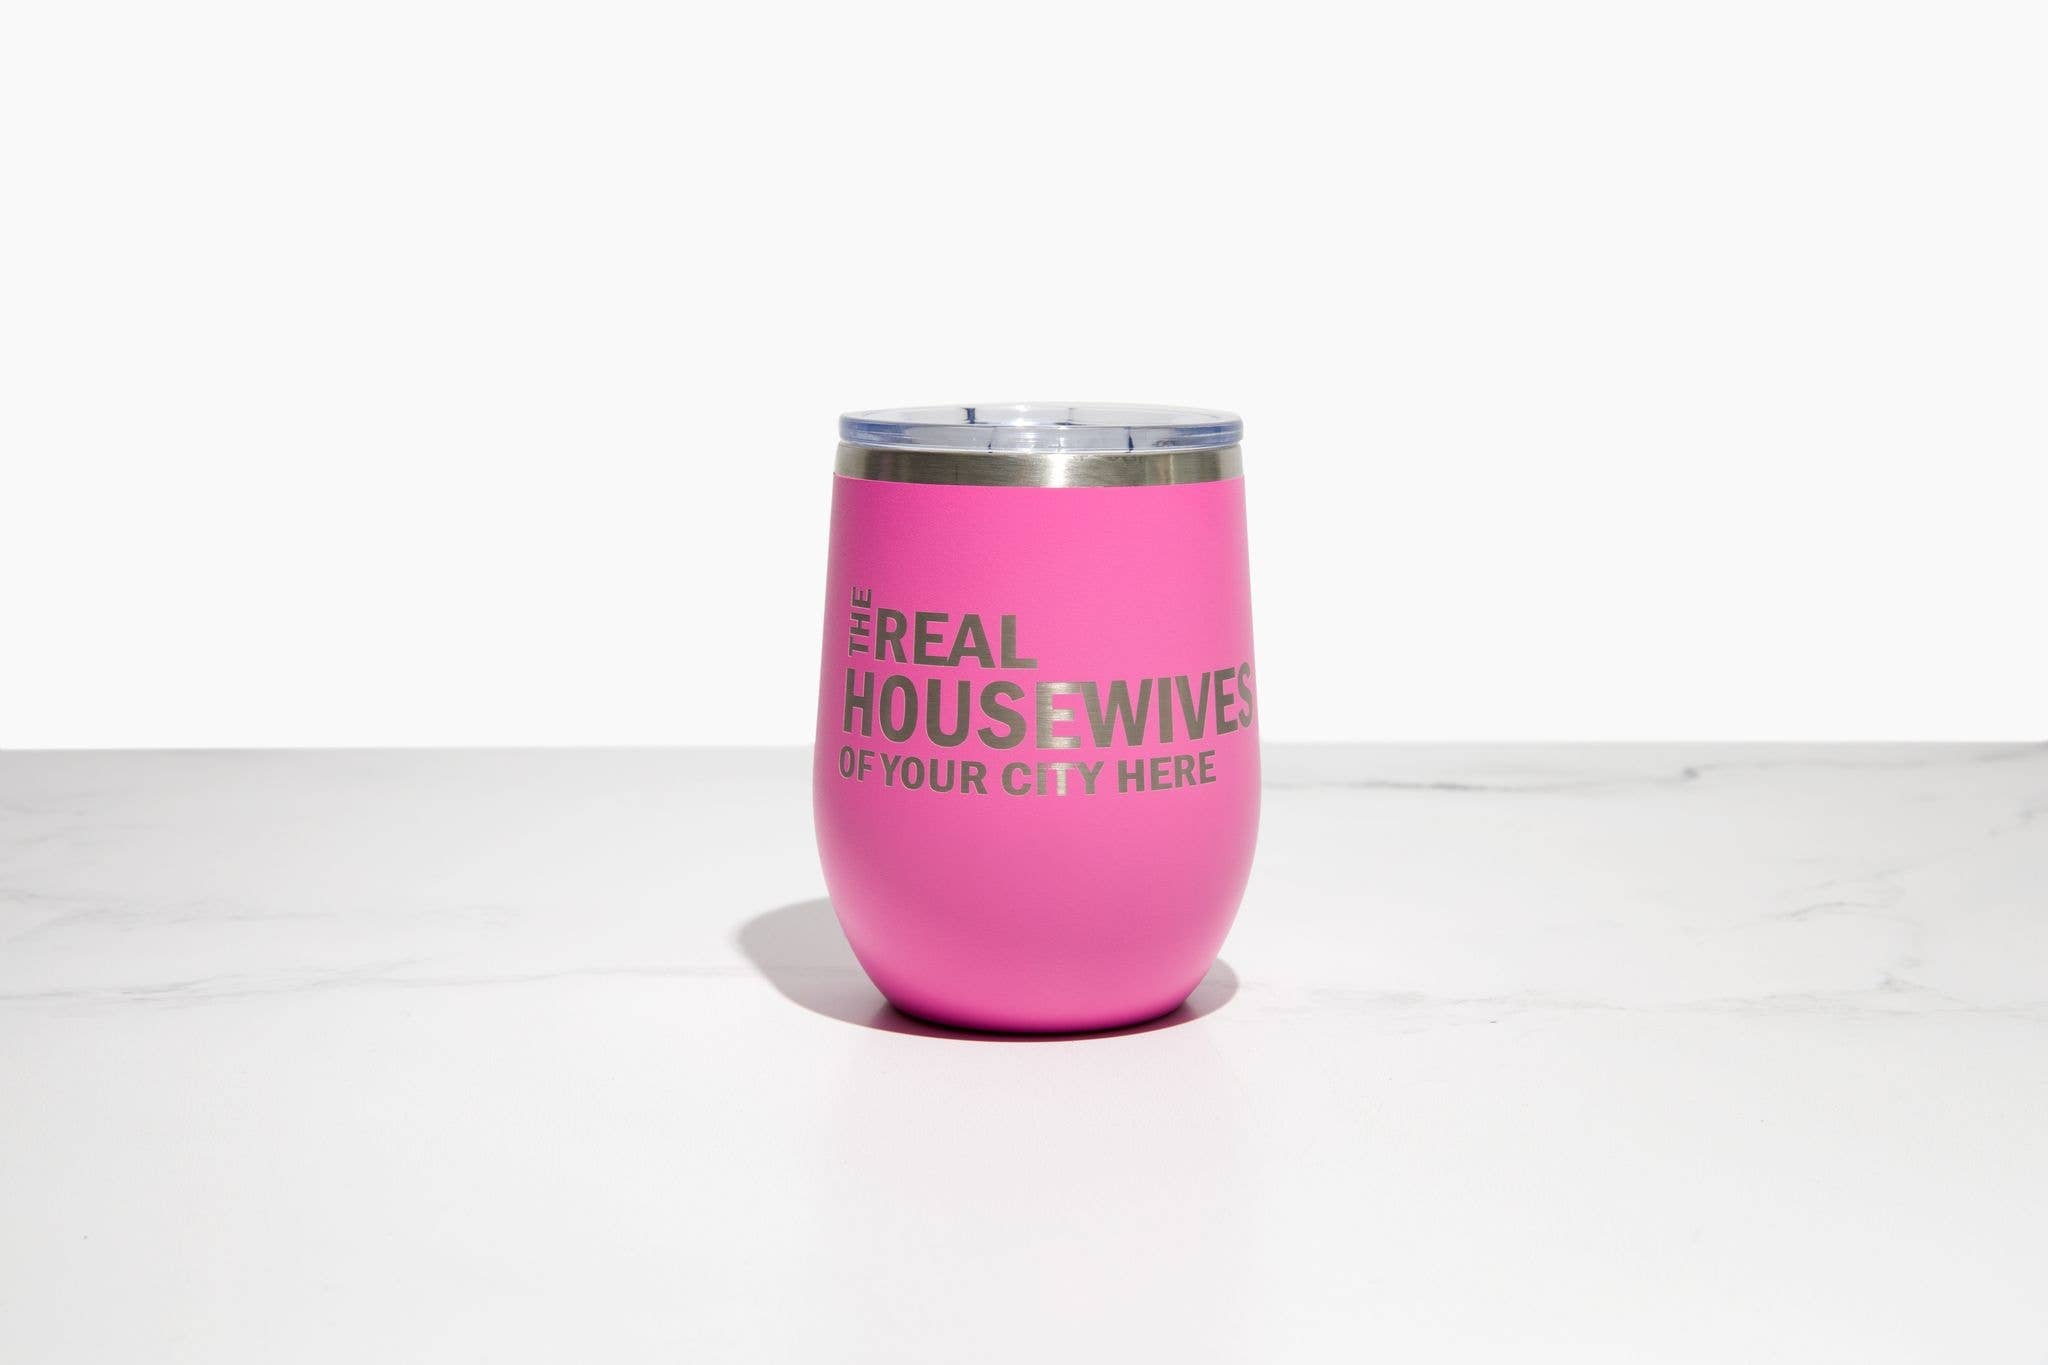 Real Housewives of YOUR CUSTOM CITY Polar Camel Wine Tumbler: Teal